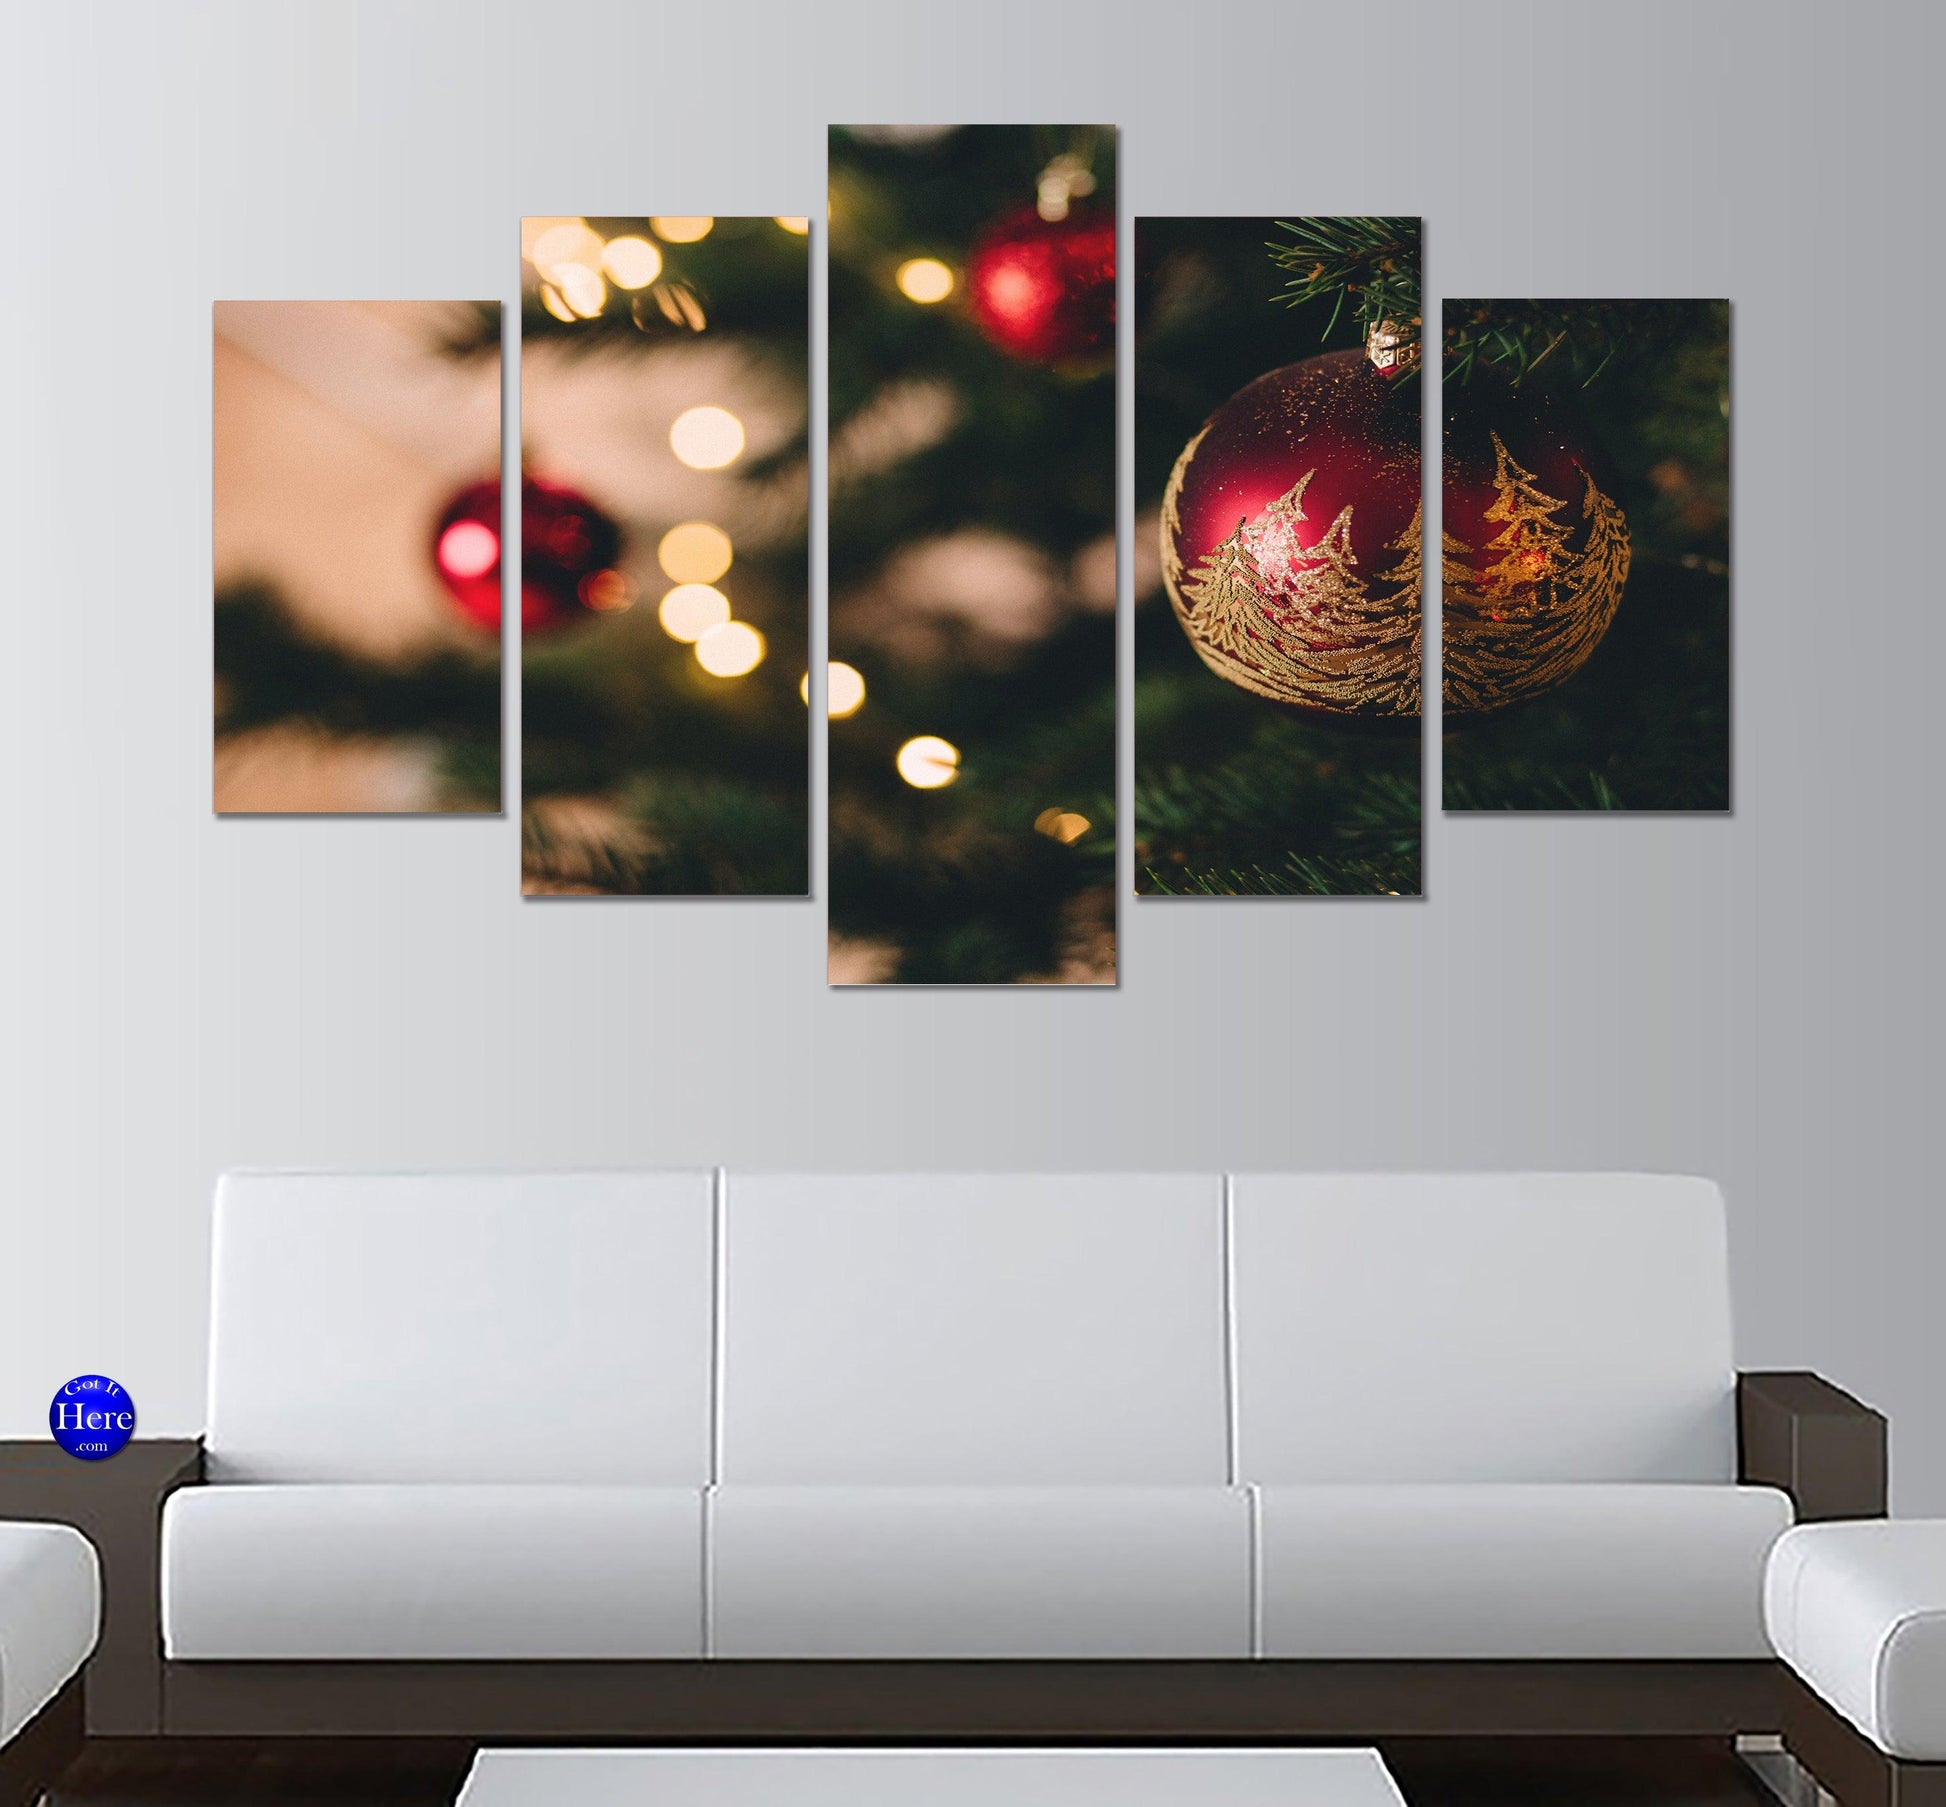 Red Bauble On Christmas Tree 5 Panel Canvas Print Wall Art - GotItHere.com